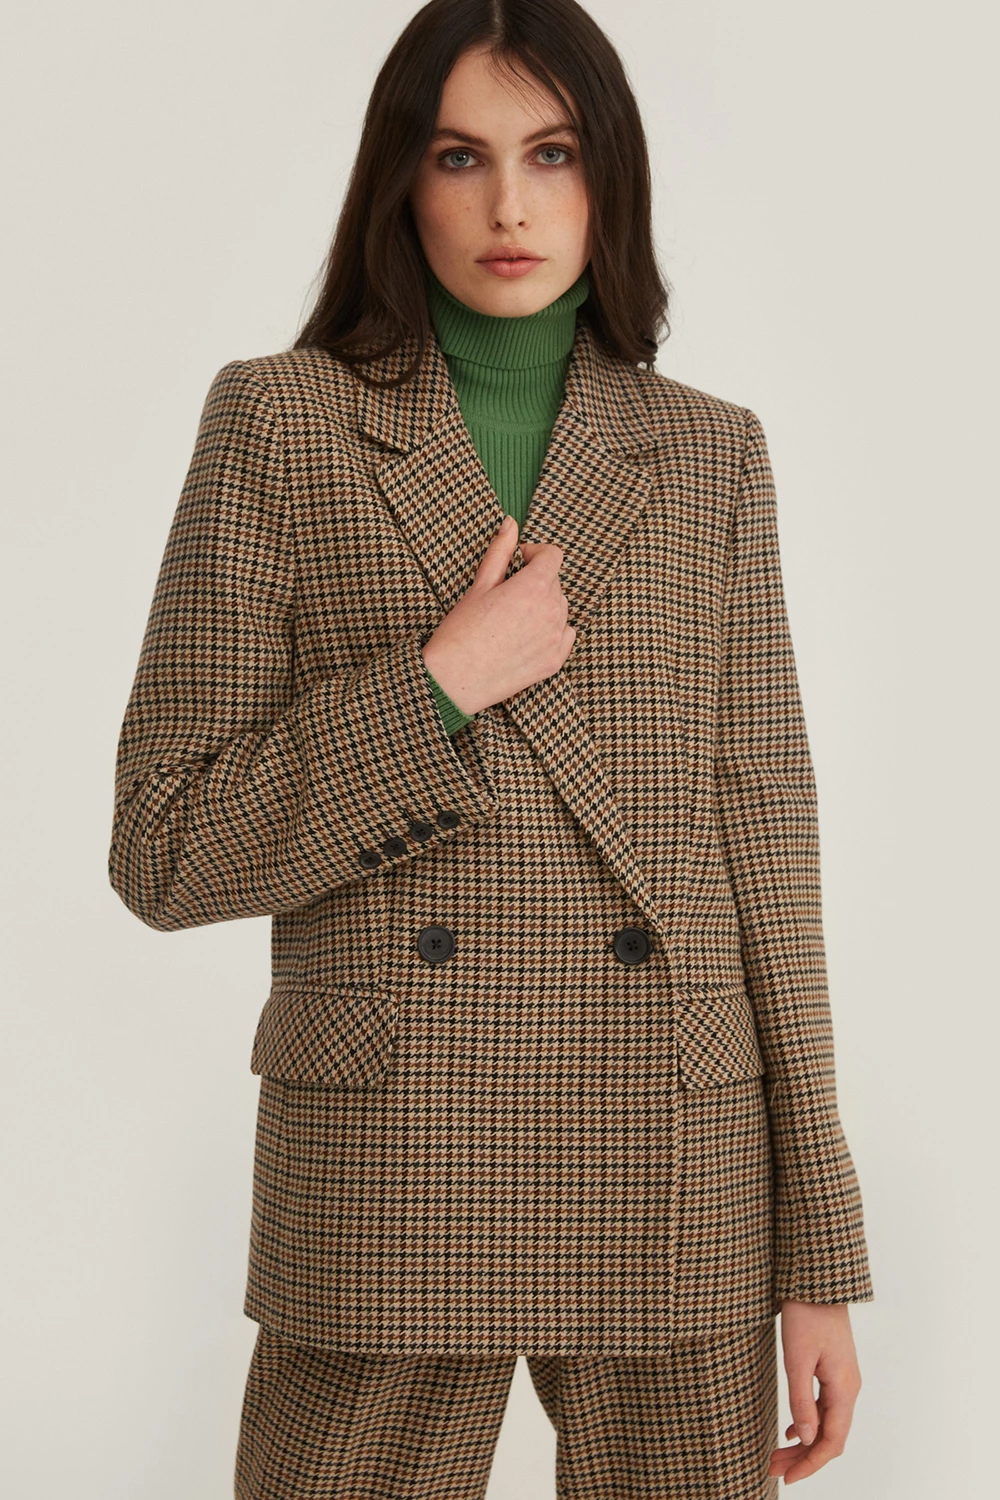 Double-breasted jacket in houndstooth pattern with wool, photo 1